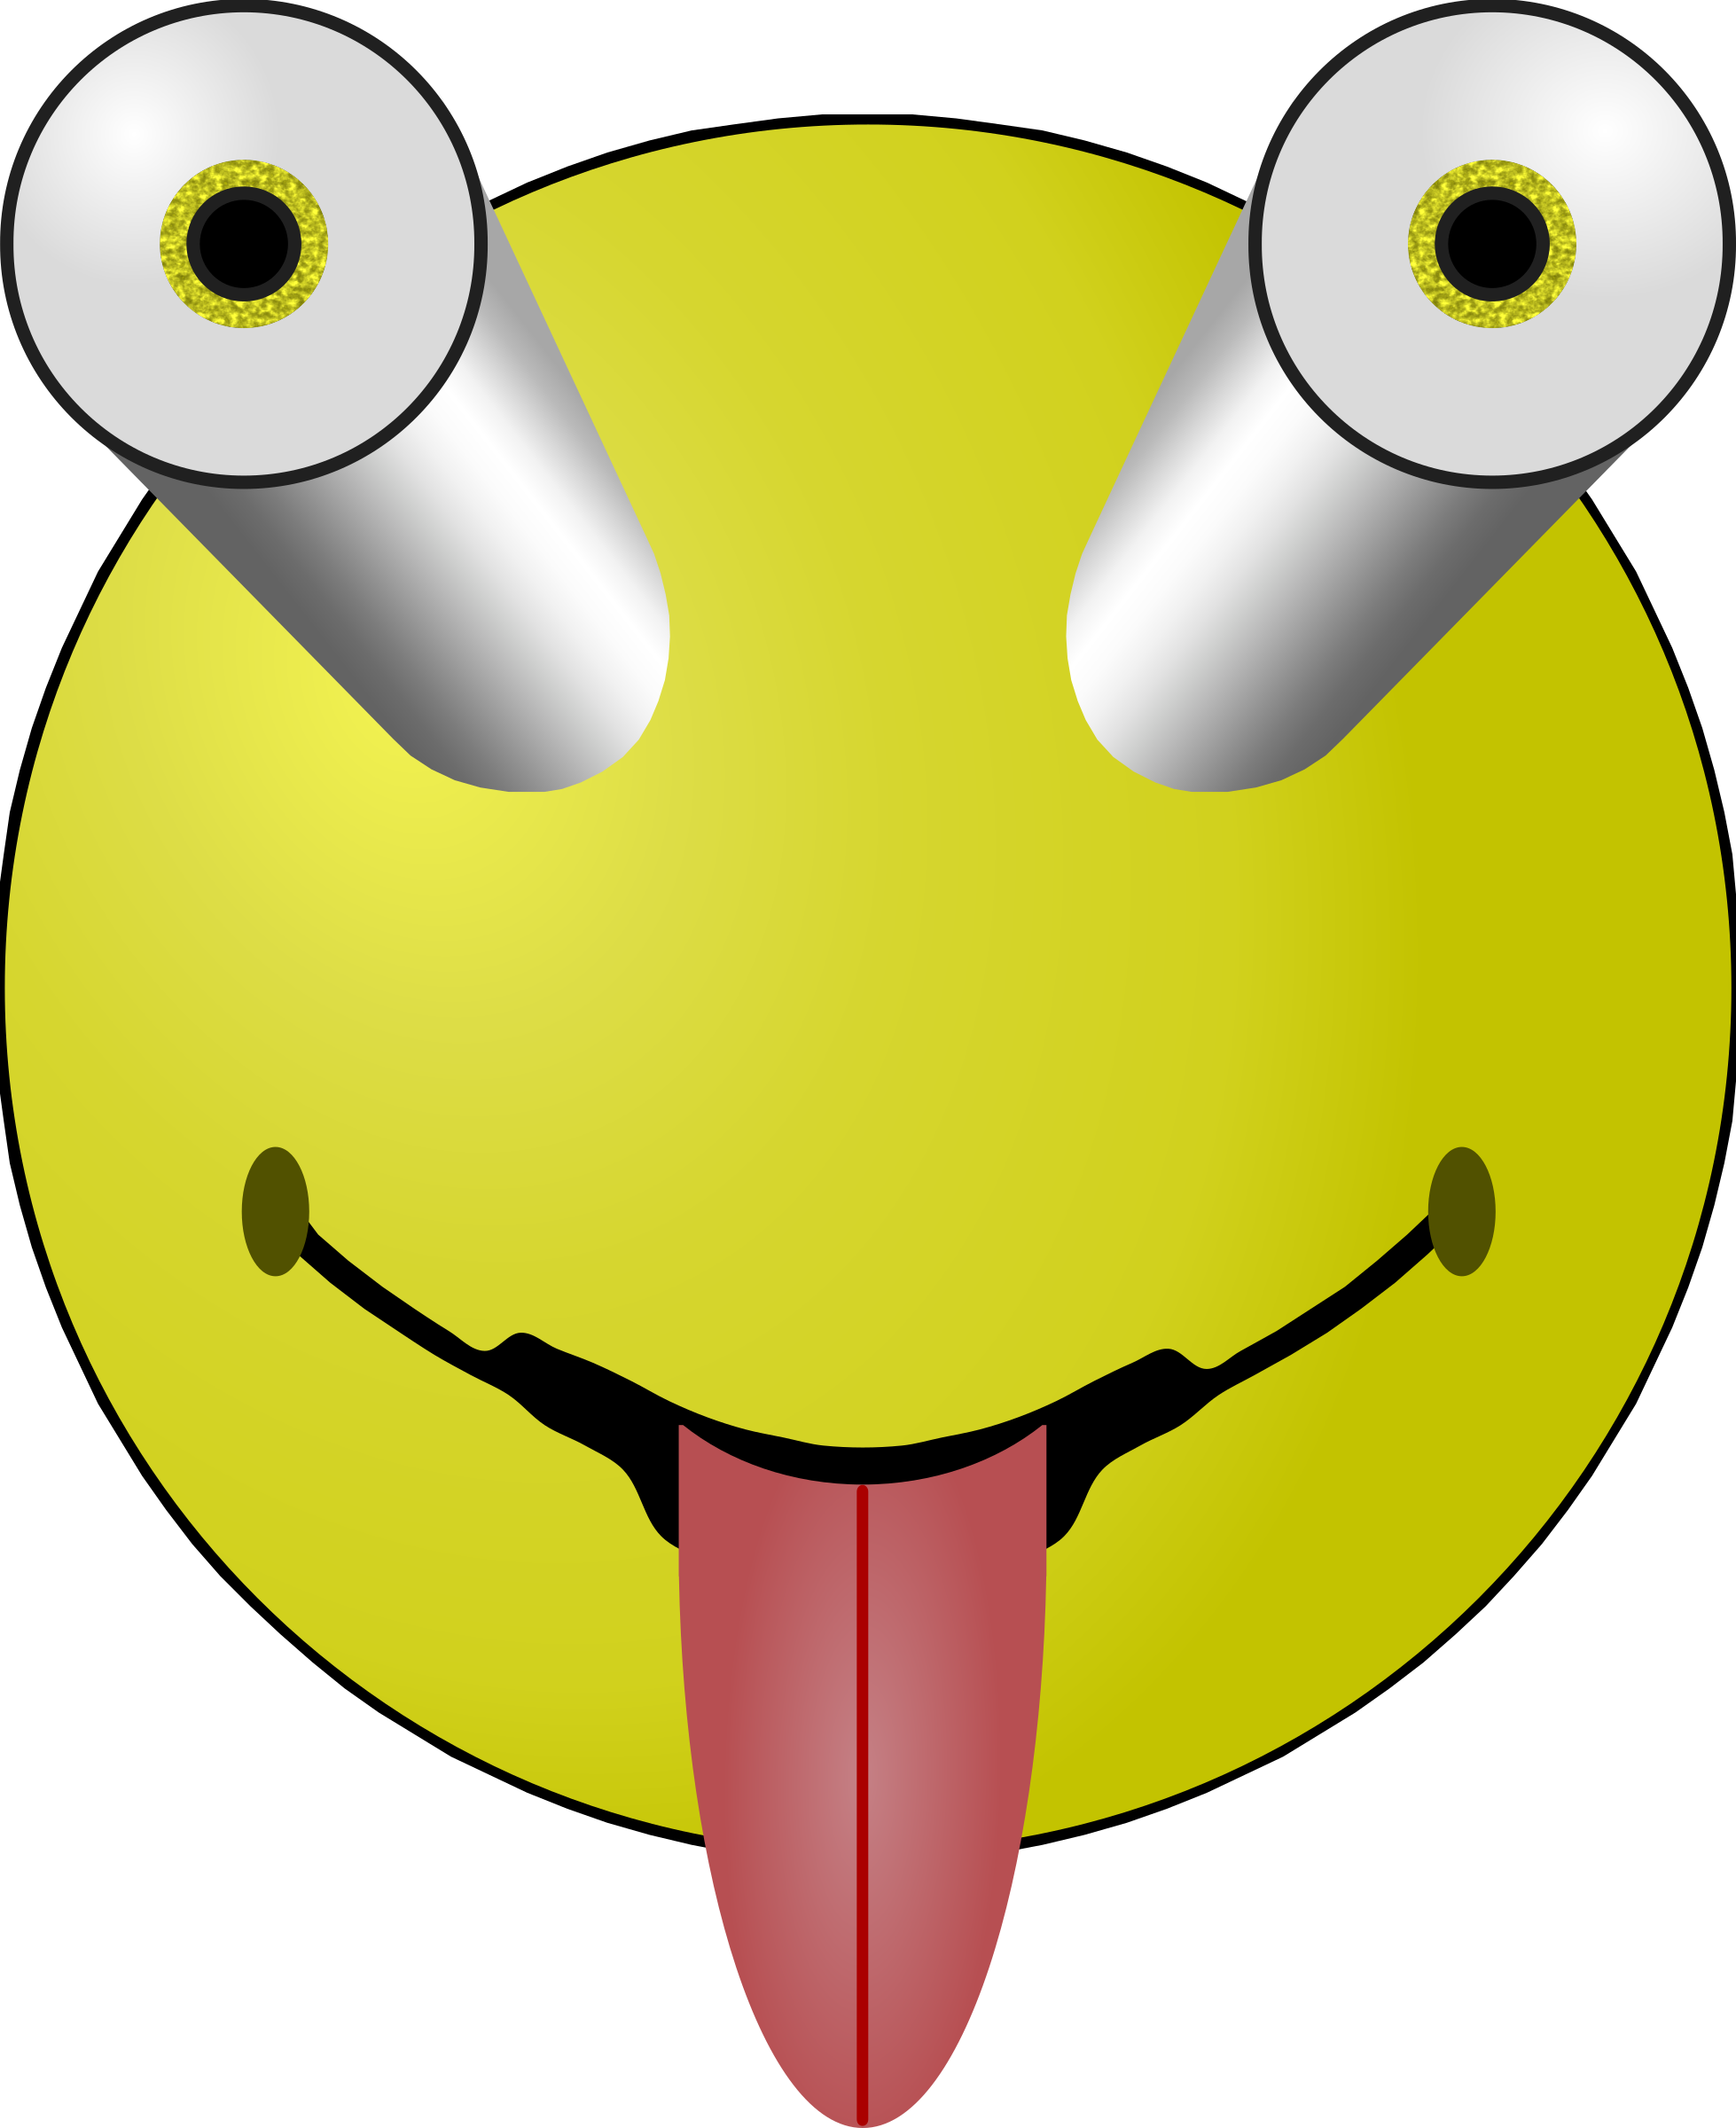 silly eyes clip art free - photo #43